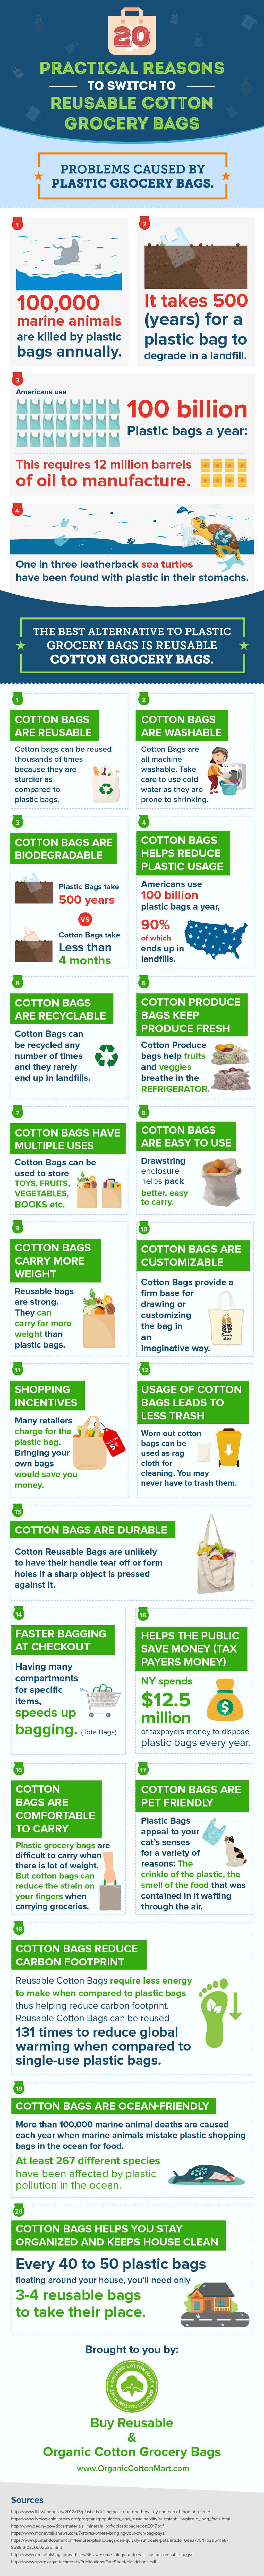  20 Practical Reasons to Switch to Reusable Grocery Bags